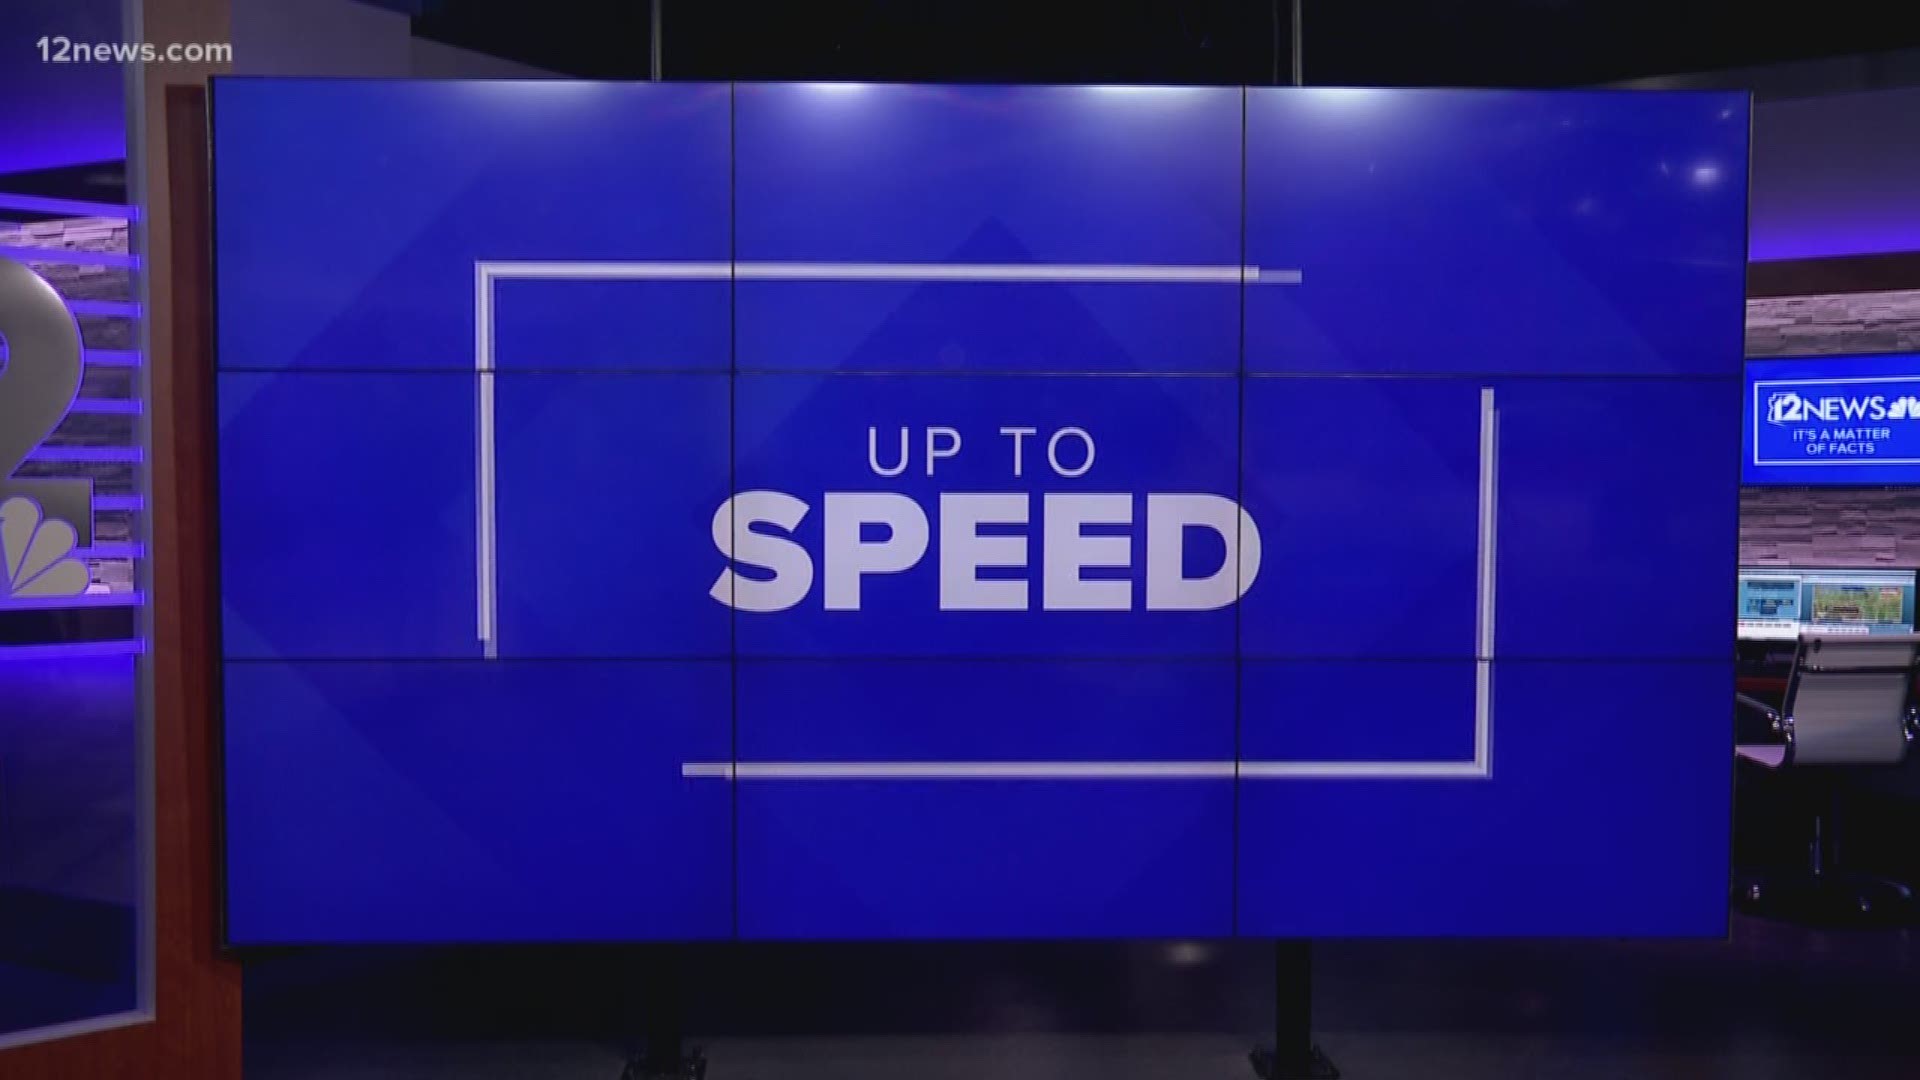 We get you "Up to Speed" on the latest news happening around the country and across the world on Wednesday afternoon.